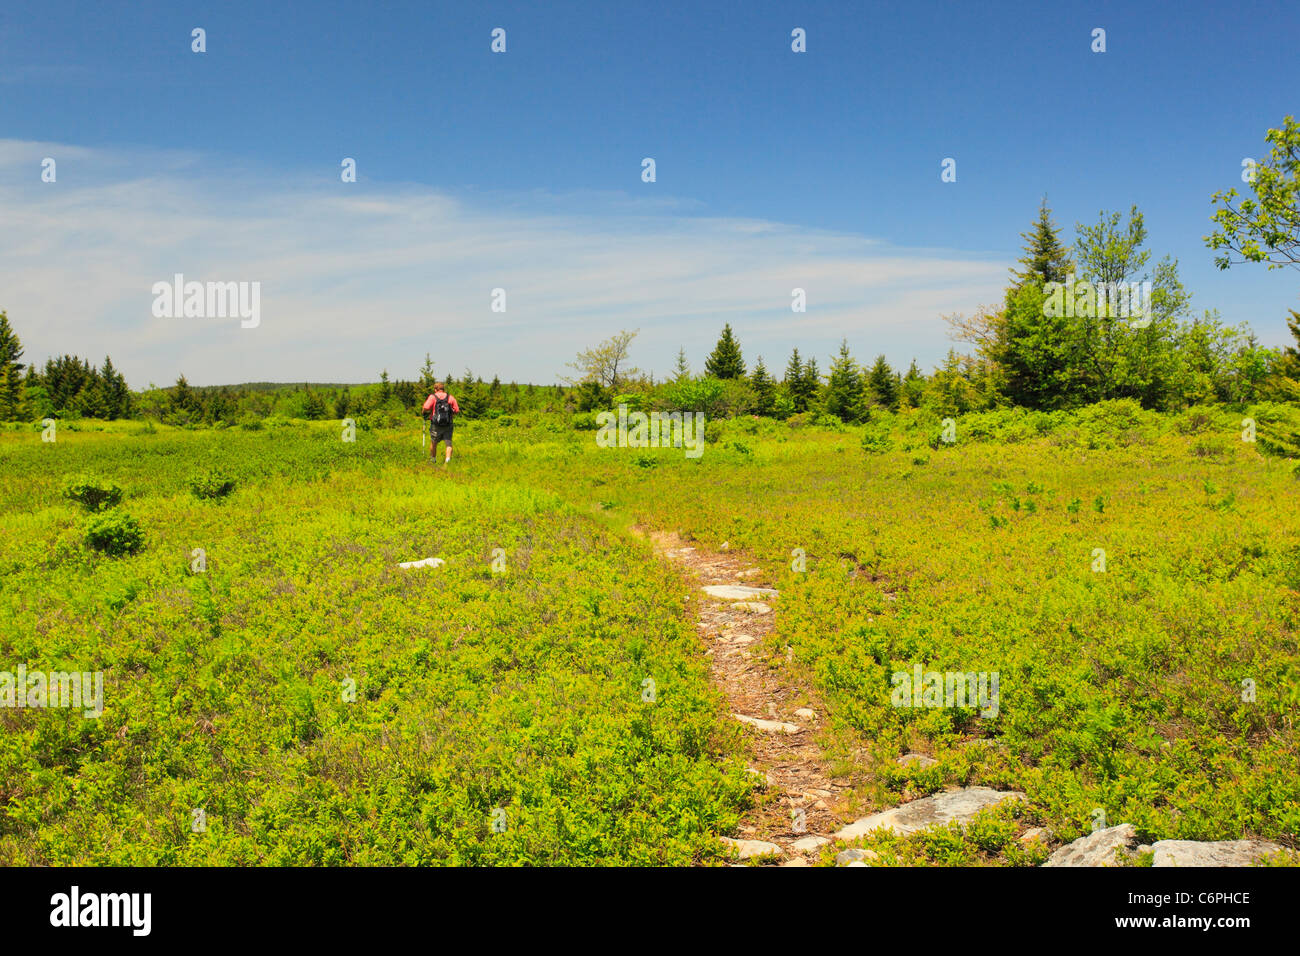 Hidden PassageTrail, Flat Rock and Roaring Plains, Dolly Sods, Dry Creek, West Virginia, USA Stock Photo